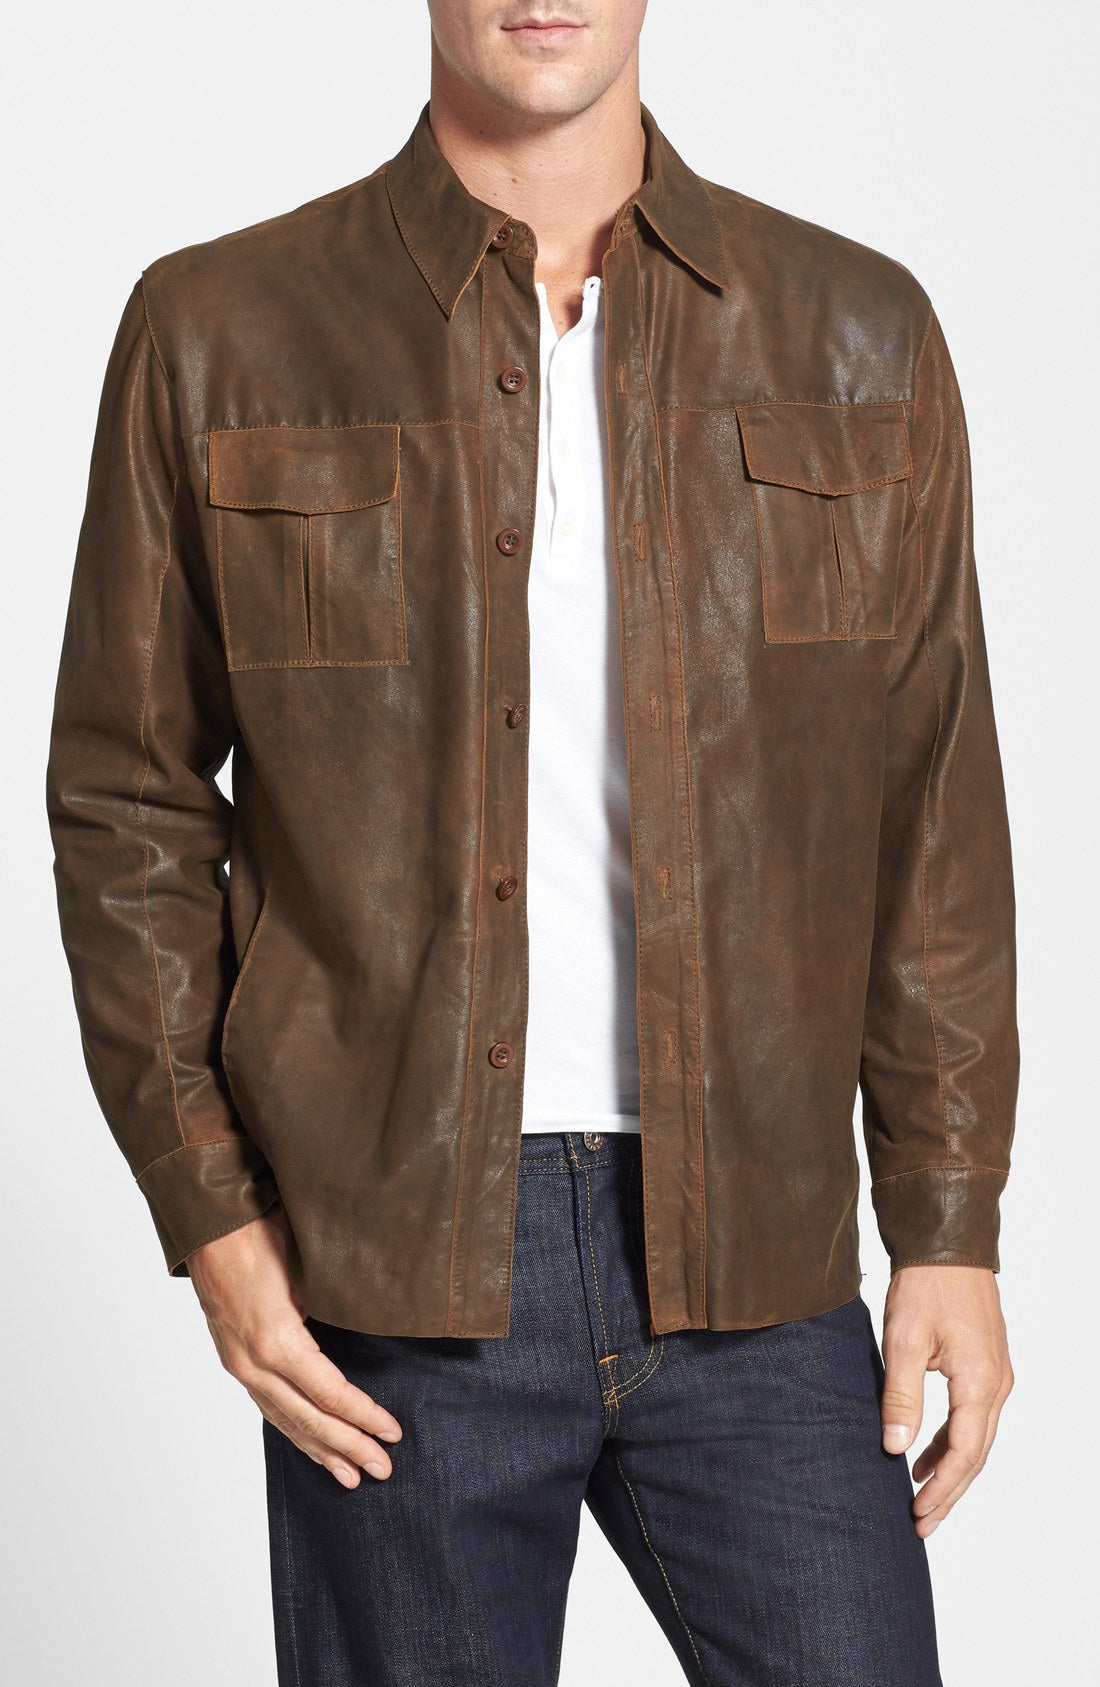 Brown Leather Shirt For a casual look